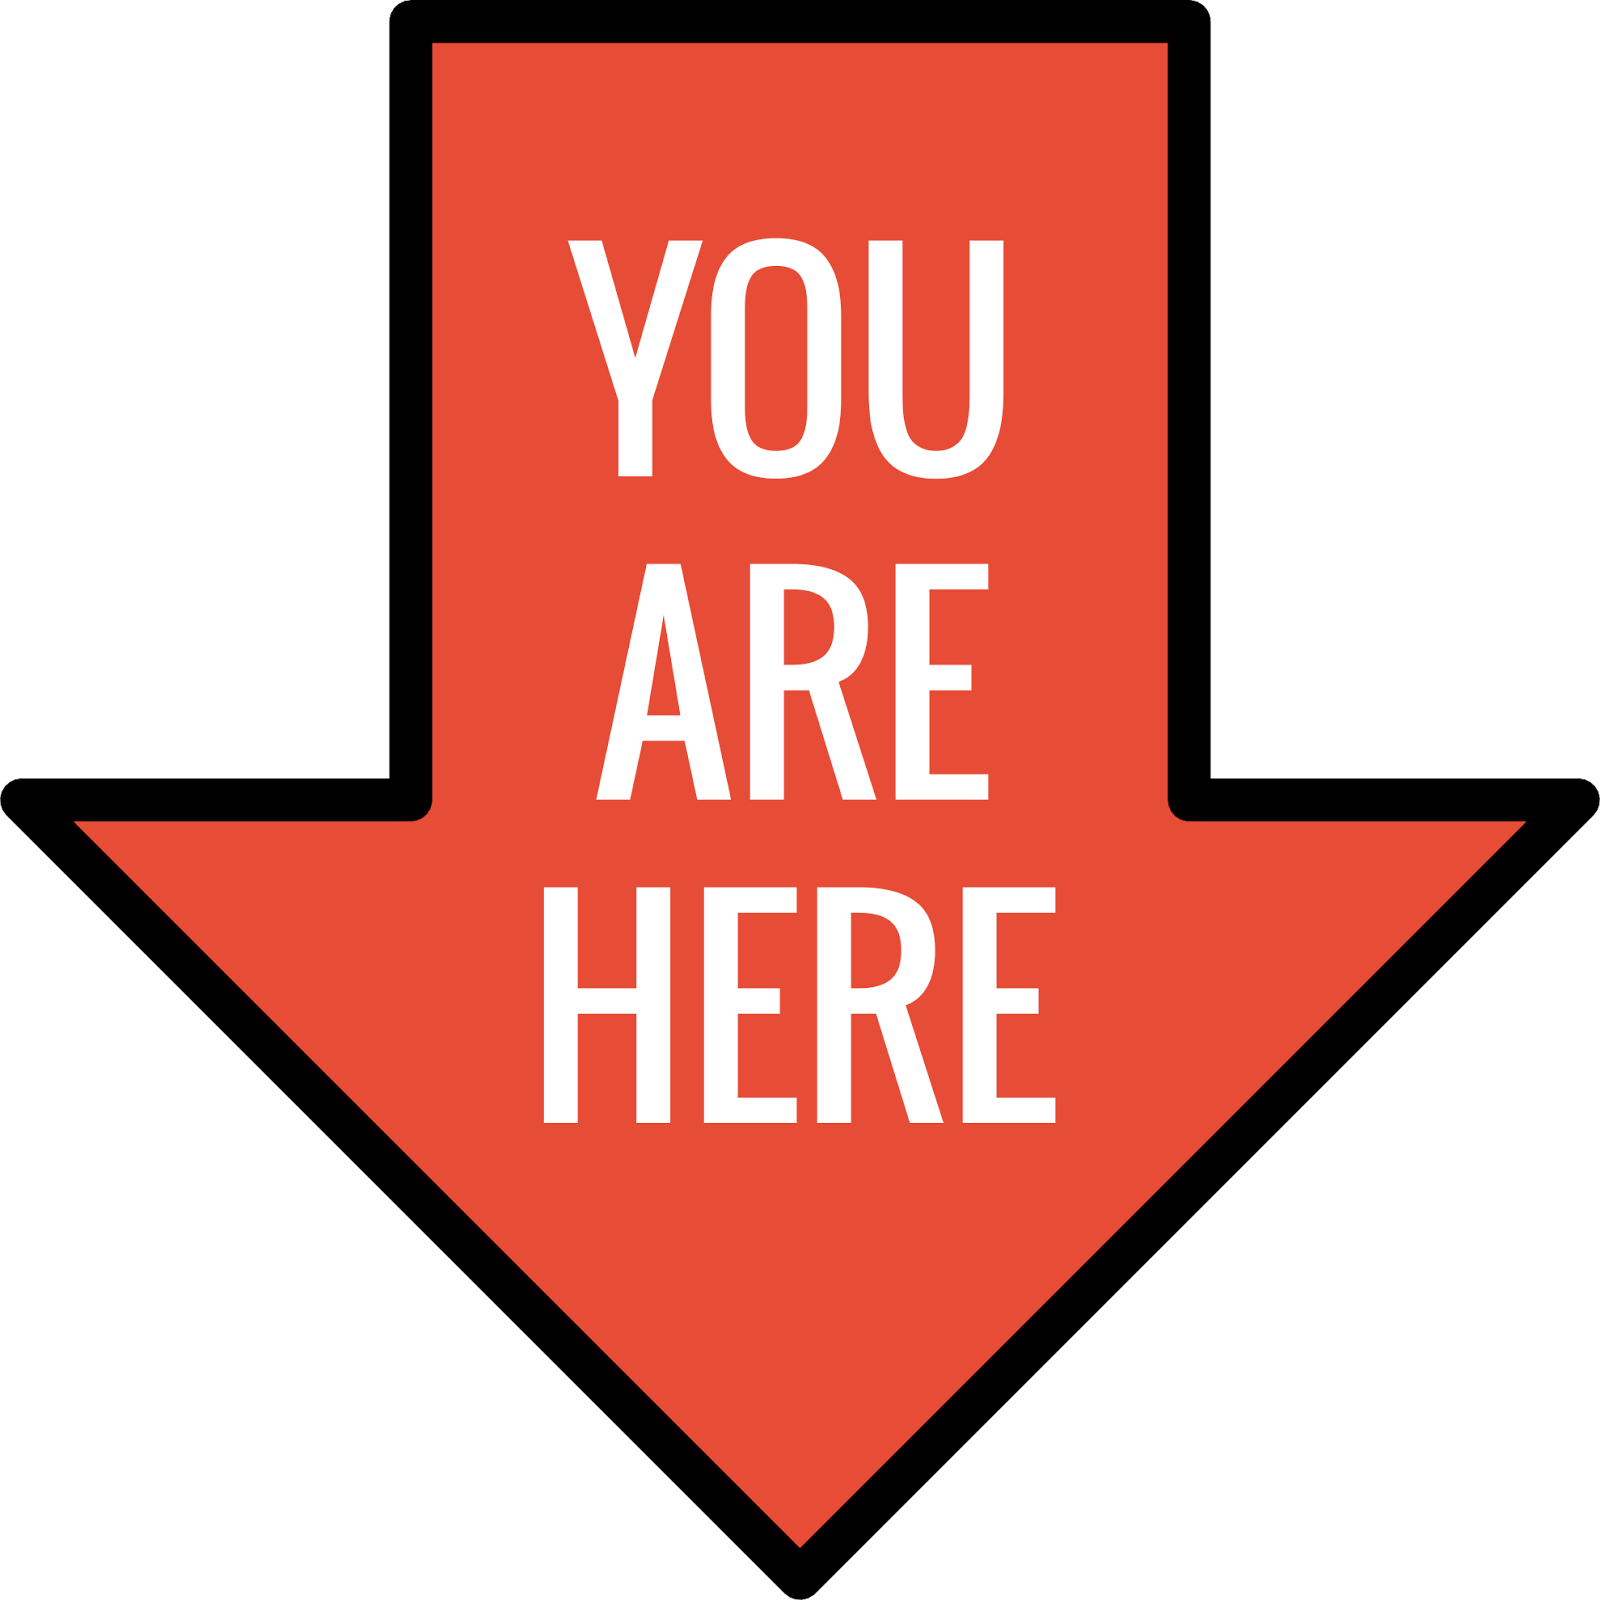 clip art you are here sign - photo #1